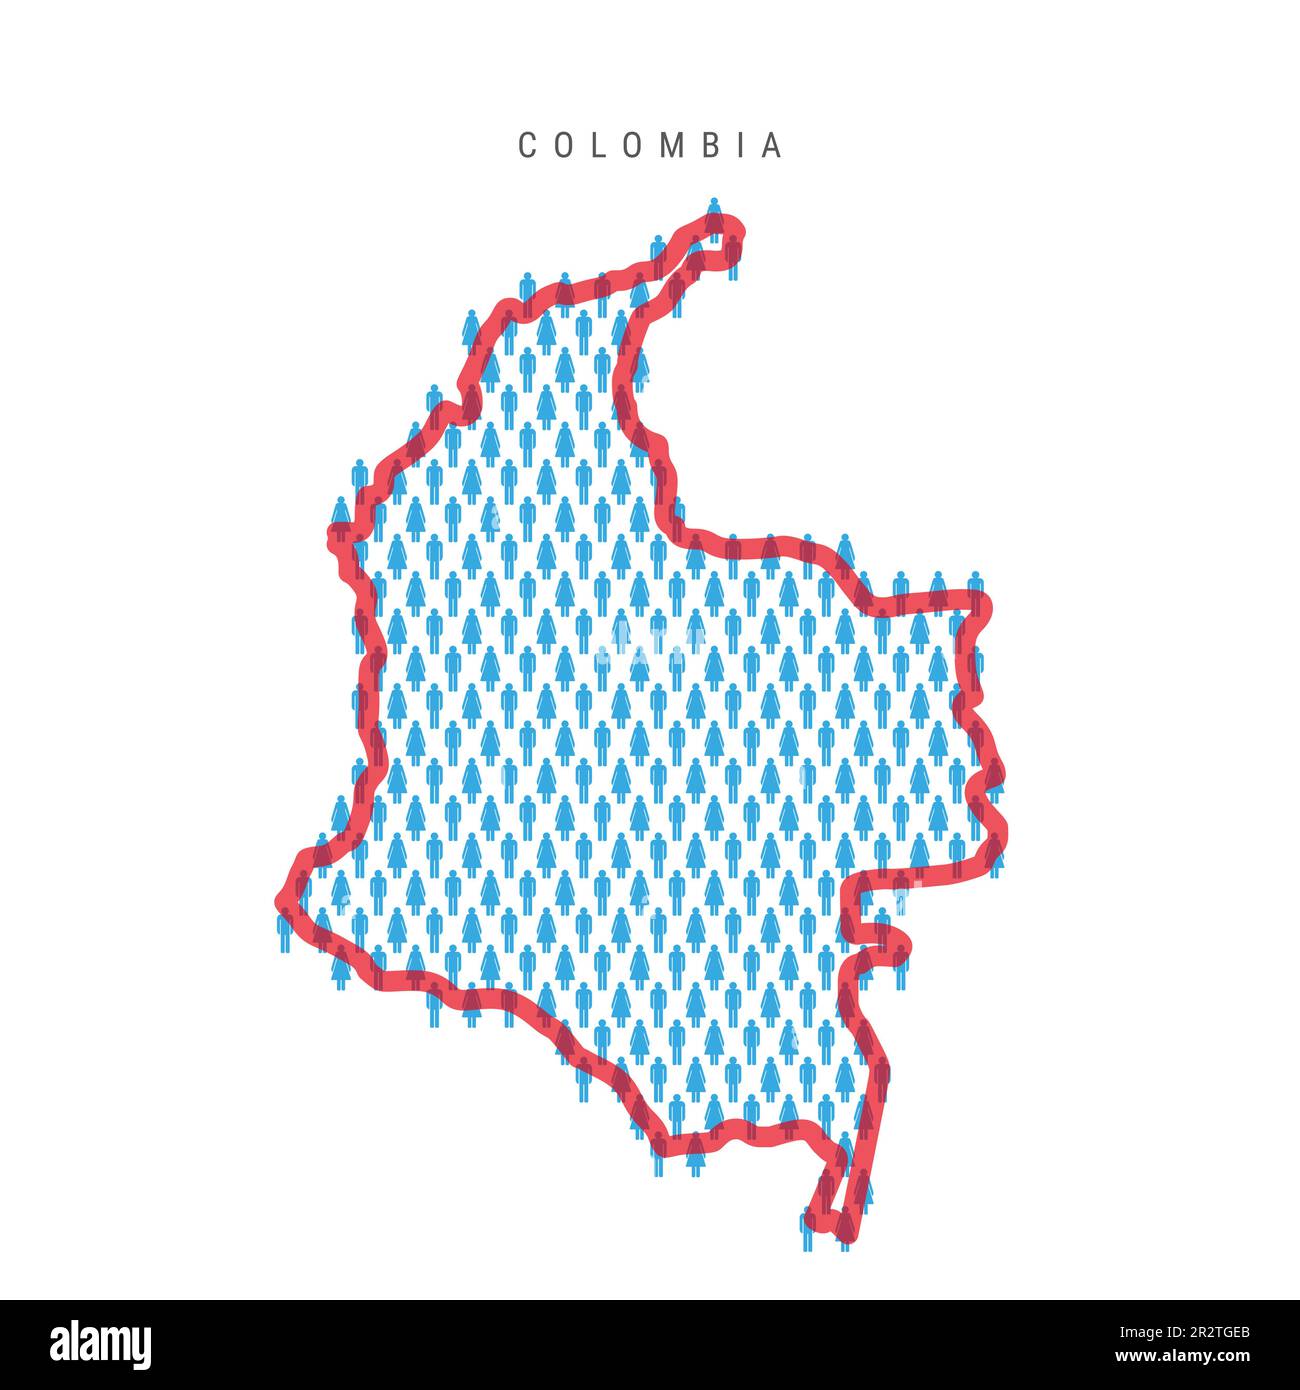 Colombia population map. Stick figures Colombian people map with bold red translucent country border. Pattern of men and women icons. Isolated vector Stock Vector